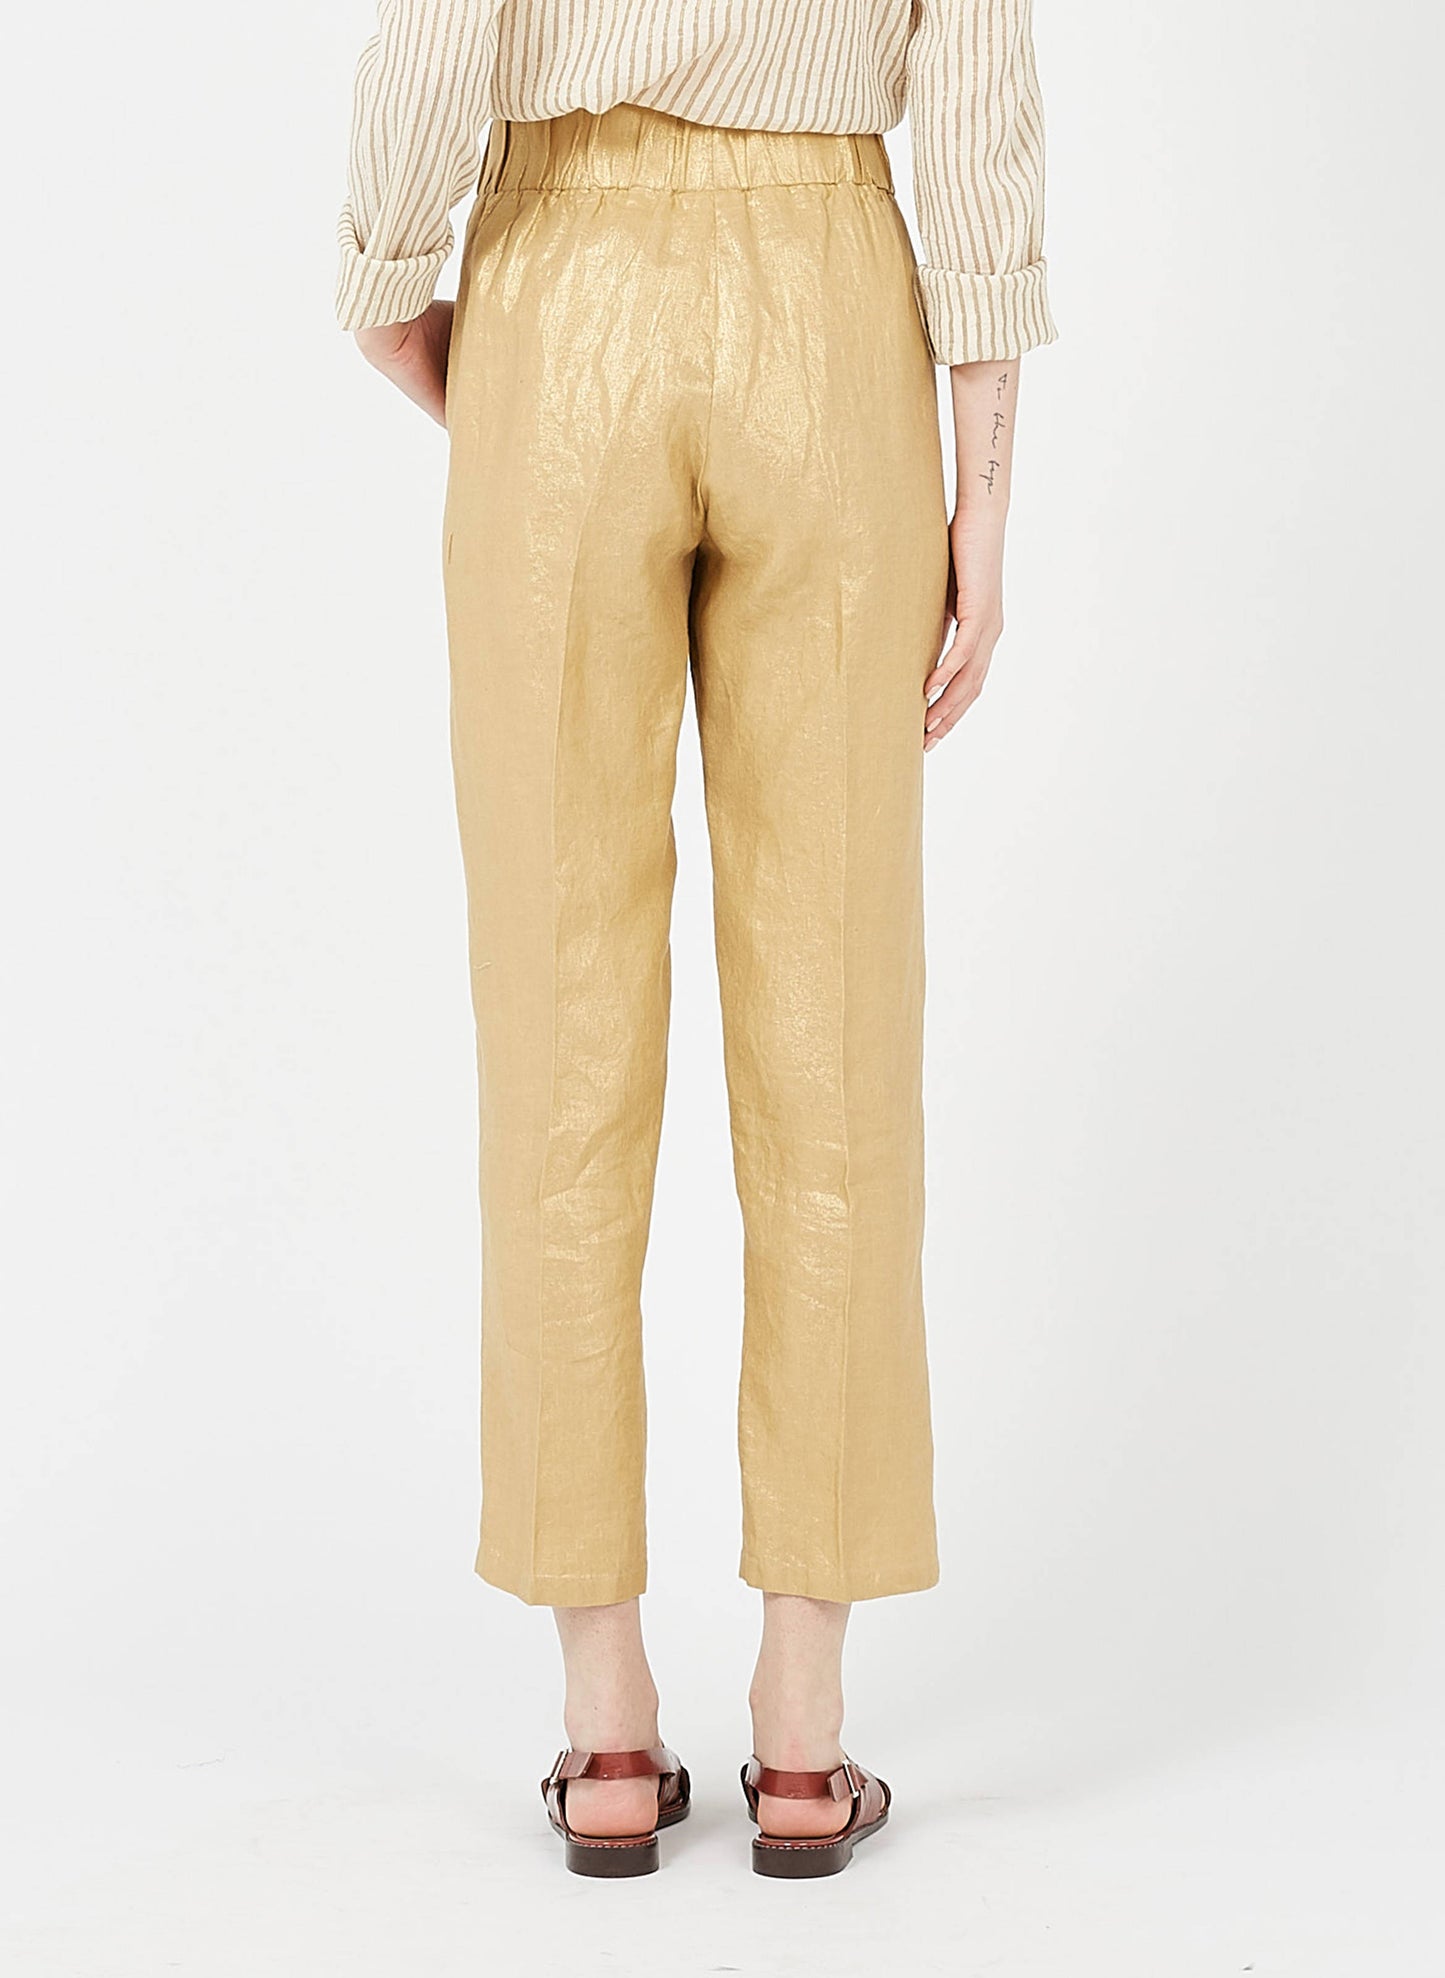 Papao Gold Linen Pant